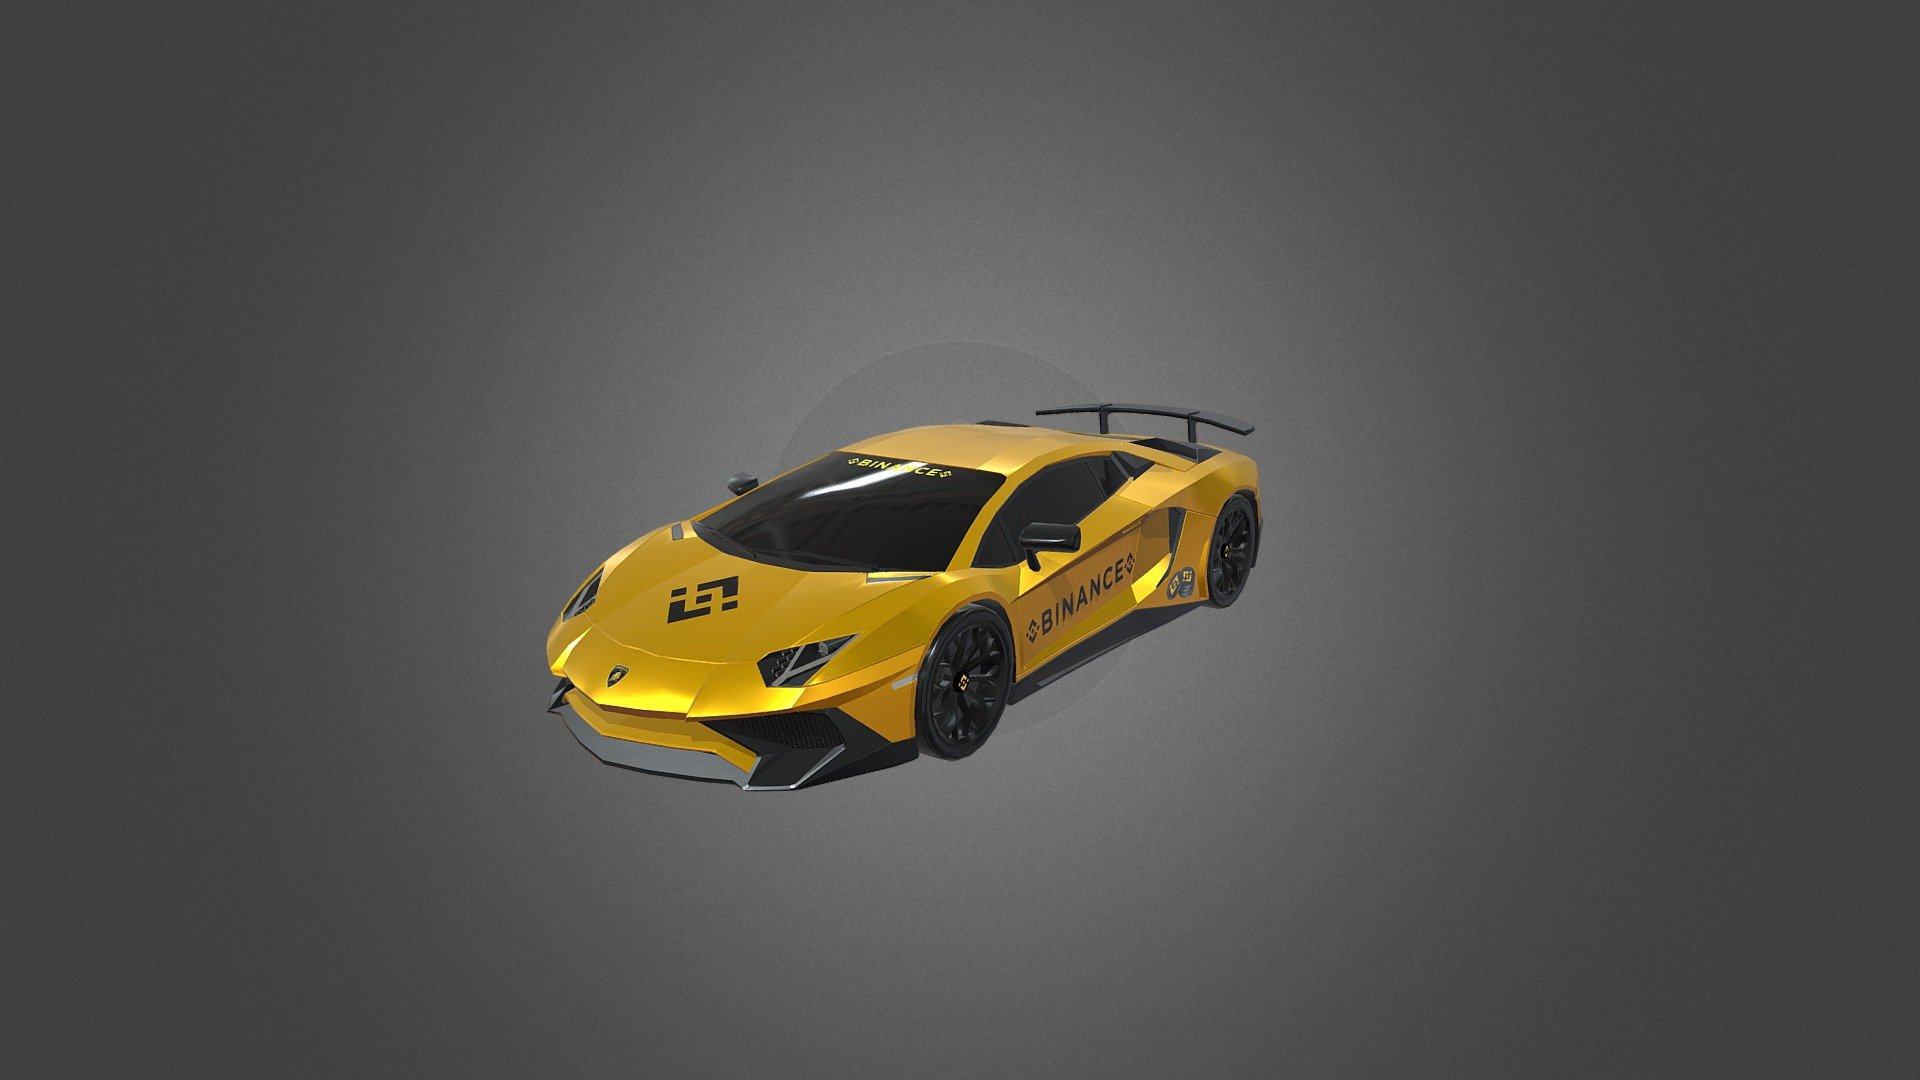 You can buy exclusive 3D objects in the form of NFTs on Opensea
https://opensea.io/metaverses_3d - lamborghini Binance 2022 - 3D model by NFT and Metaverse (@mikolas777111) 3d model